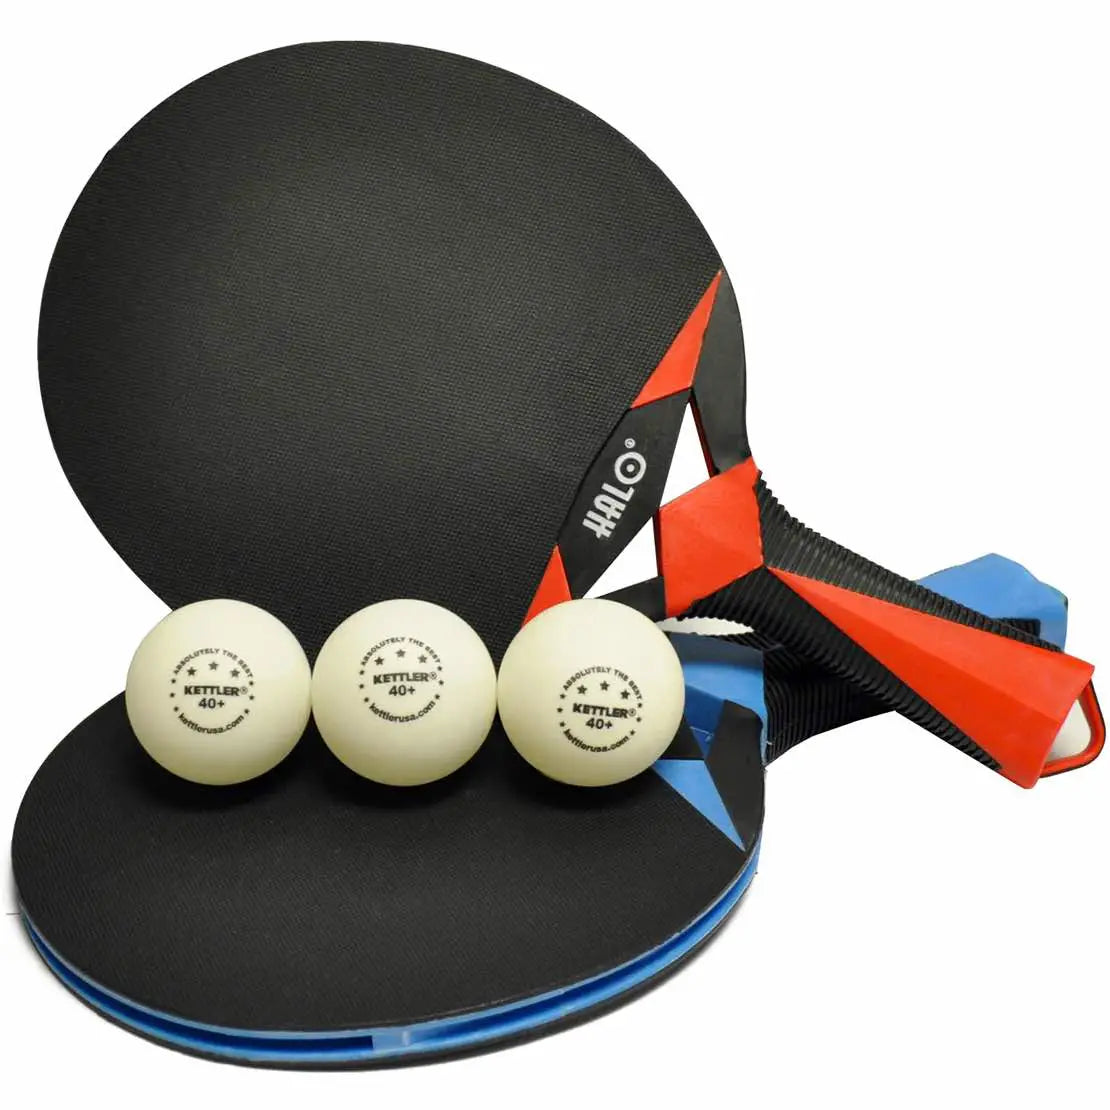 Kettler USA HALO X Outdoor 2 Player Ping Pong Table Tennis Paddle Set, 7092-200